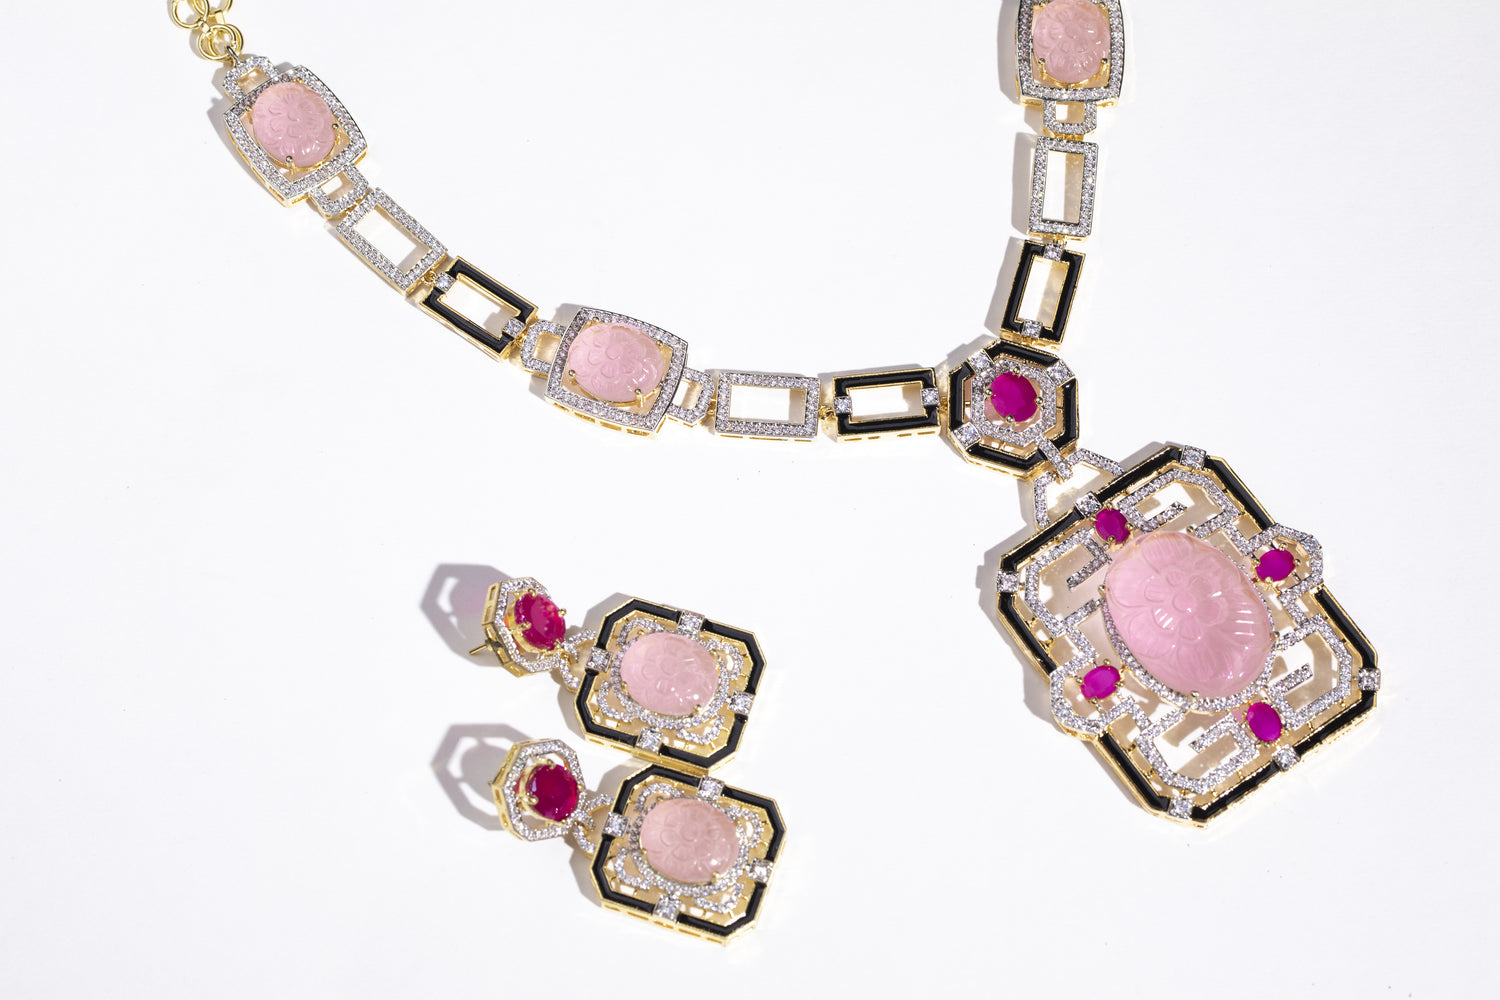 Beautiful Pink Stone and Swarovski Jewelry Set: Complete your outfit with this modern and uber necklace set." "Unique Necklace Set: Stand out with this stunning pink stone and Swarovski detailing necklace set."